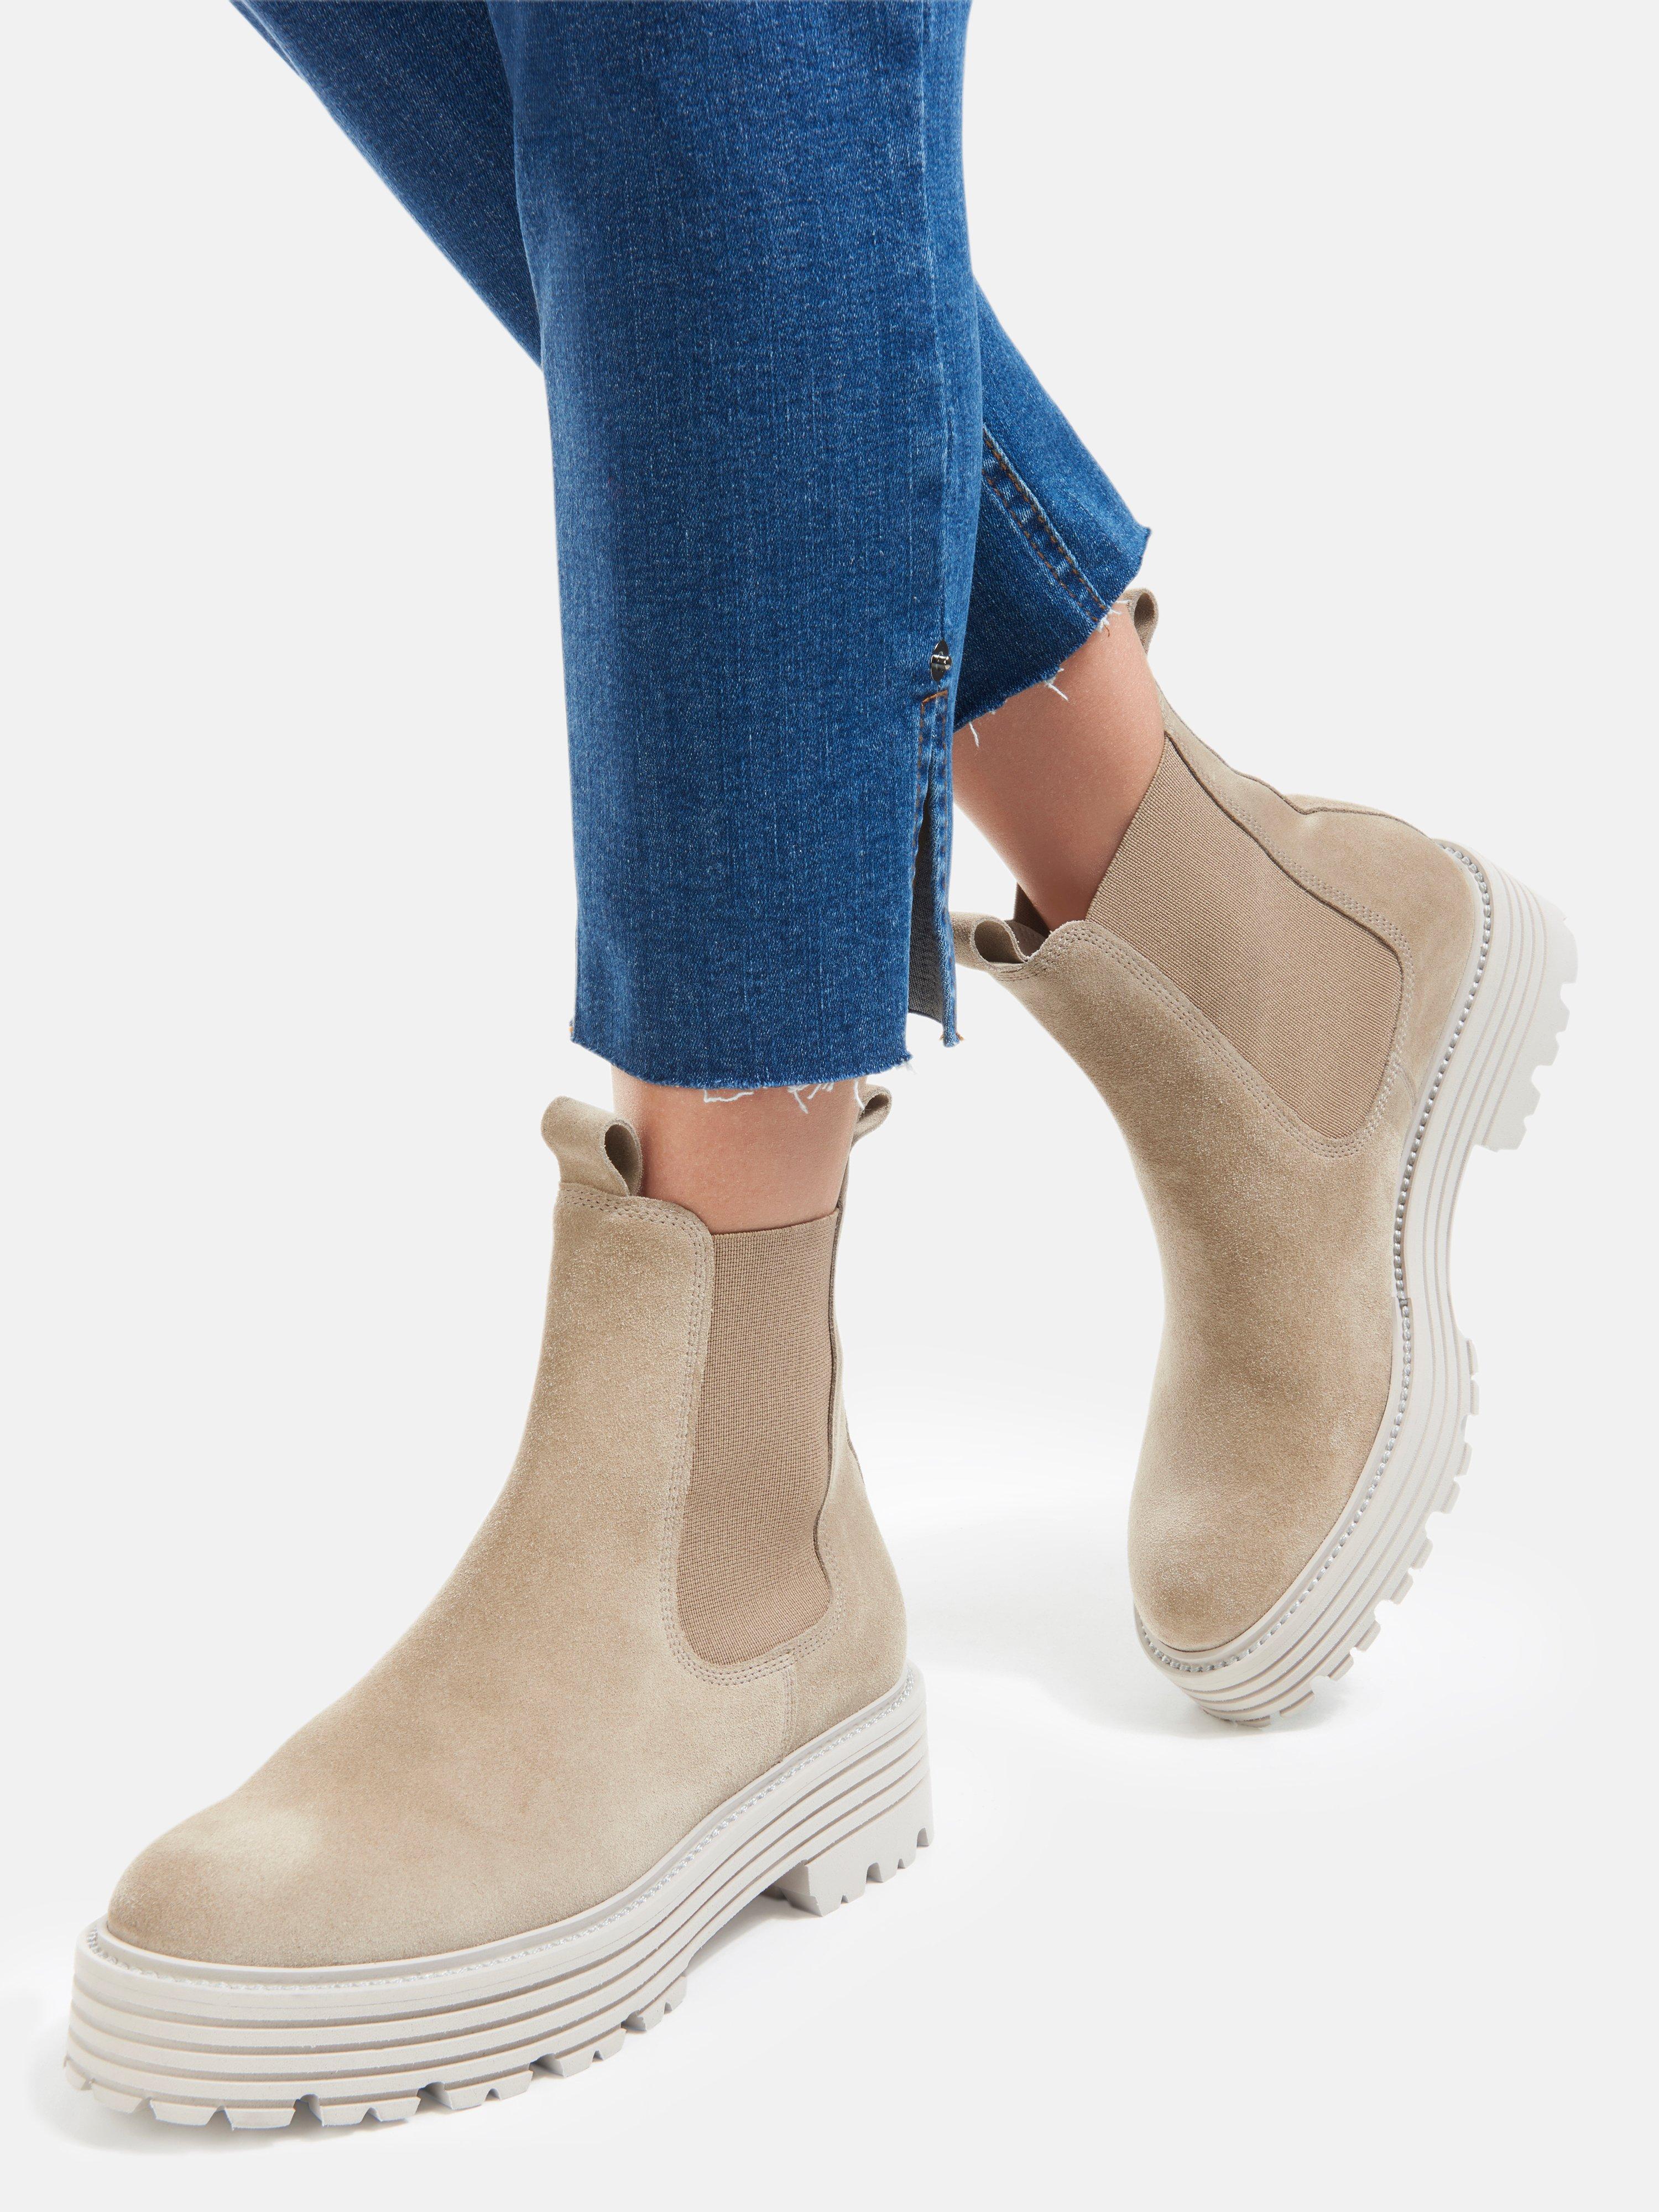 Kennel & - ankle boots Mori beige